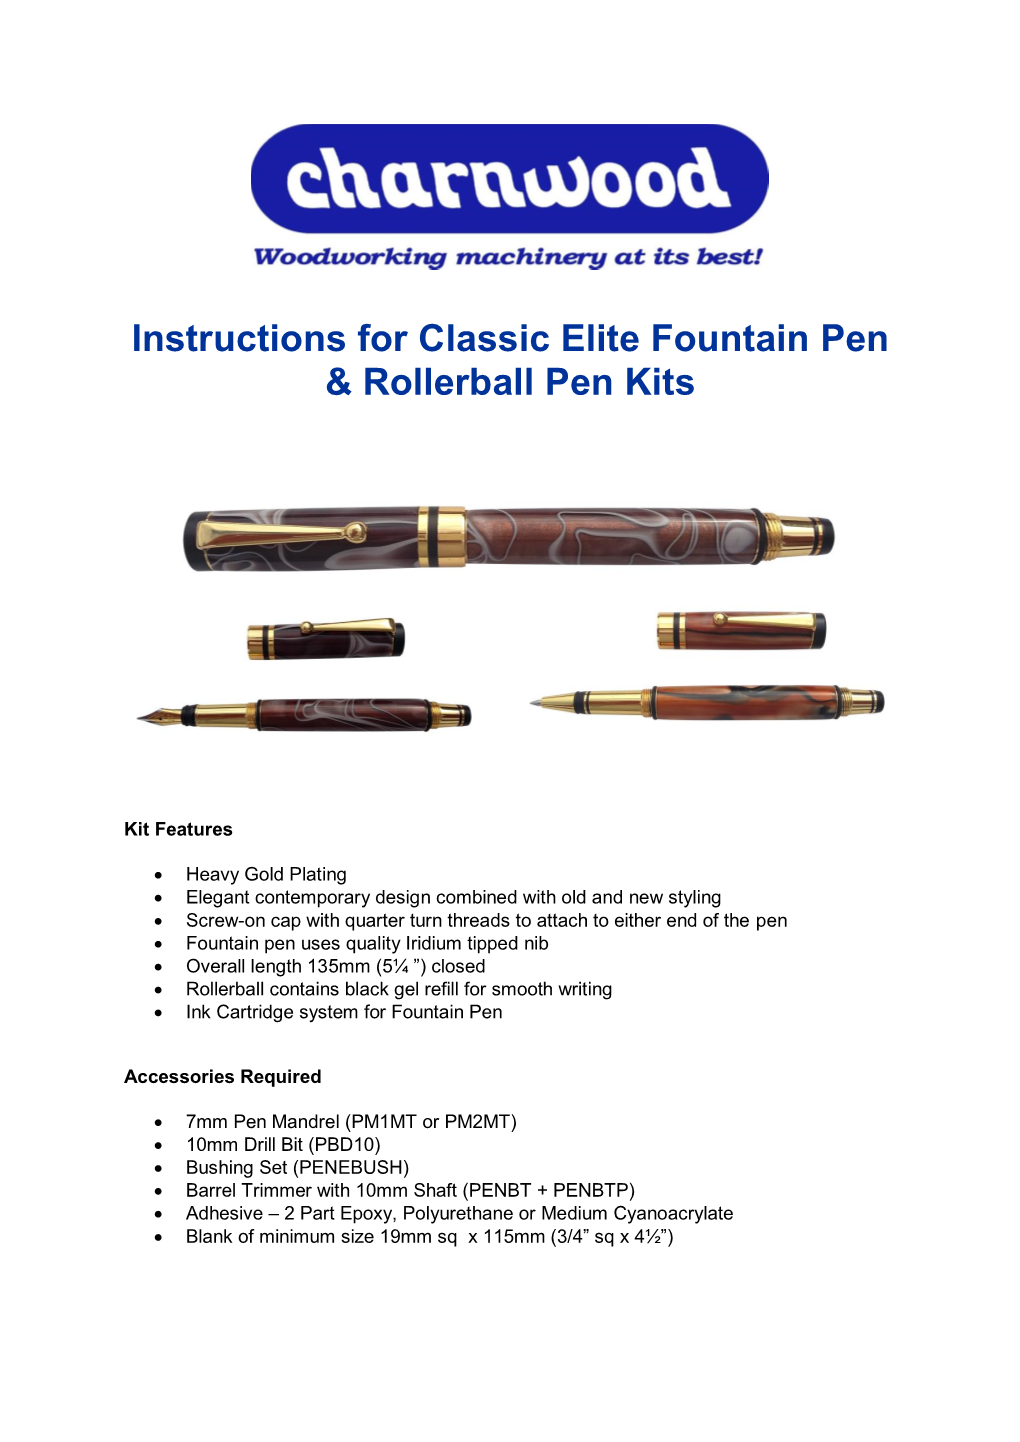 Instructions for Classic Elite Fountain Pen & Rollerball Pen Kits